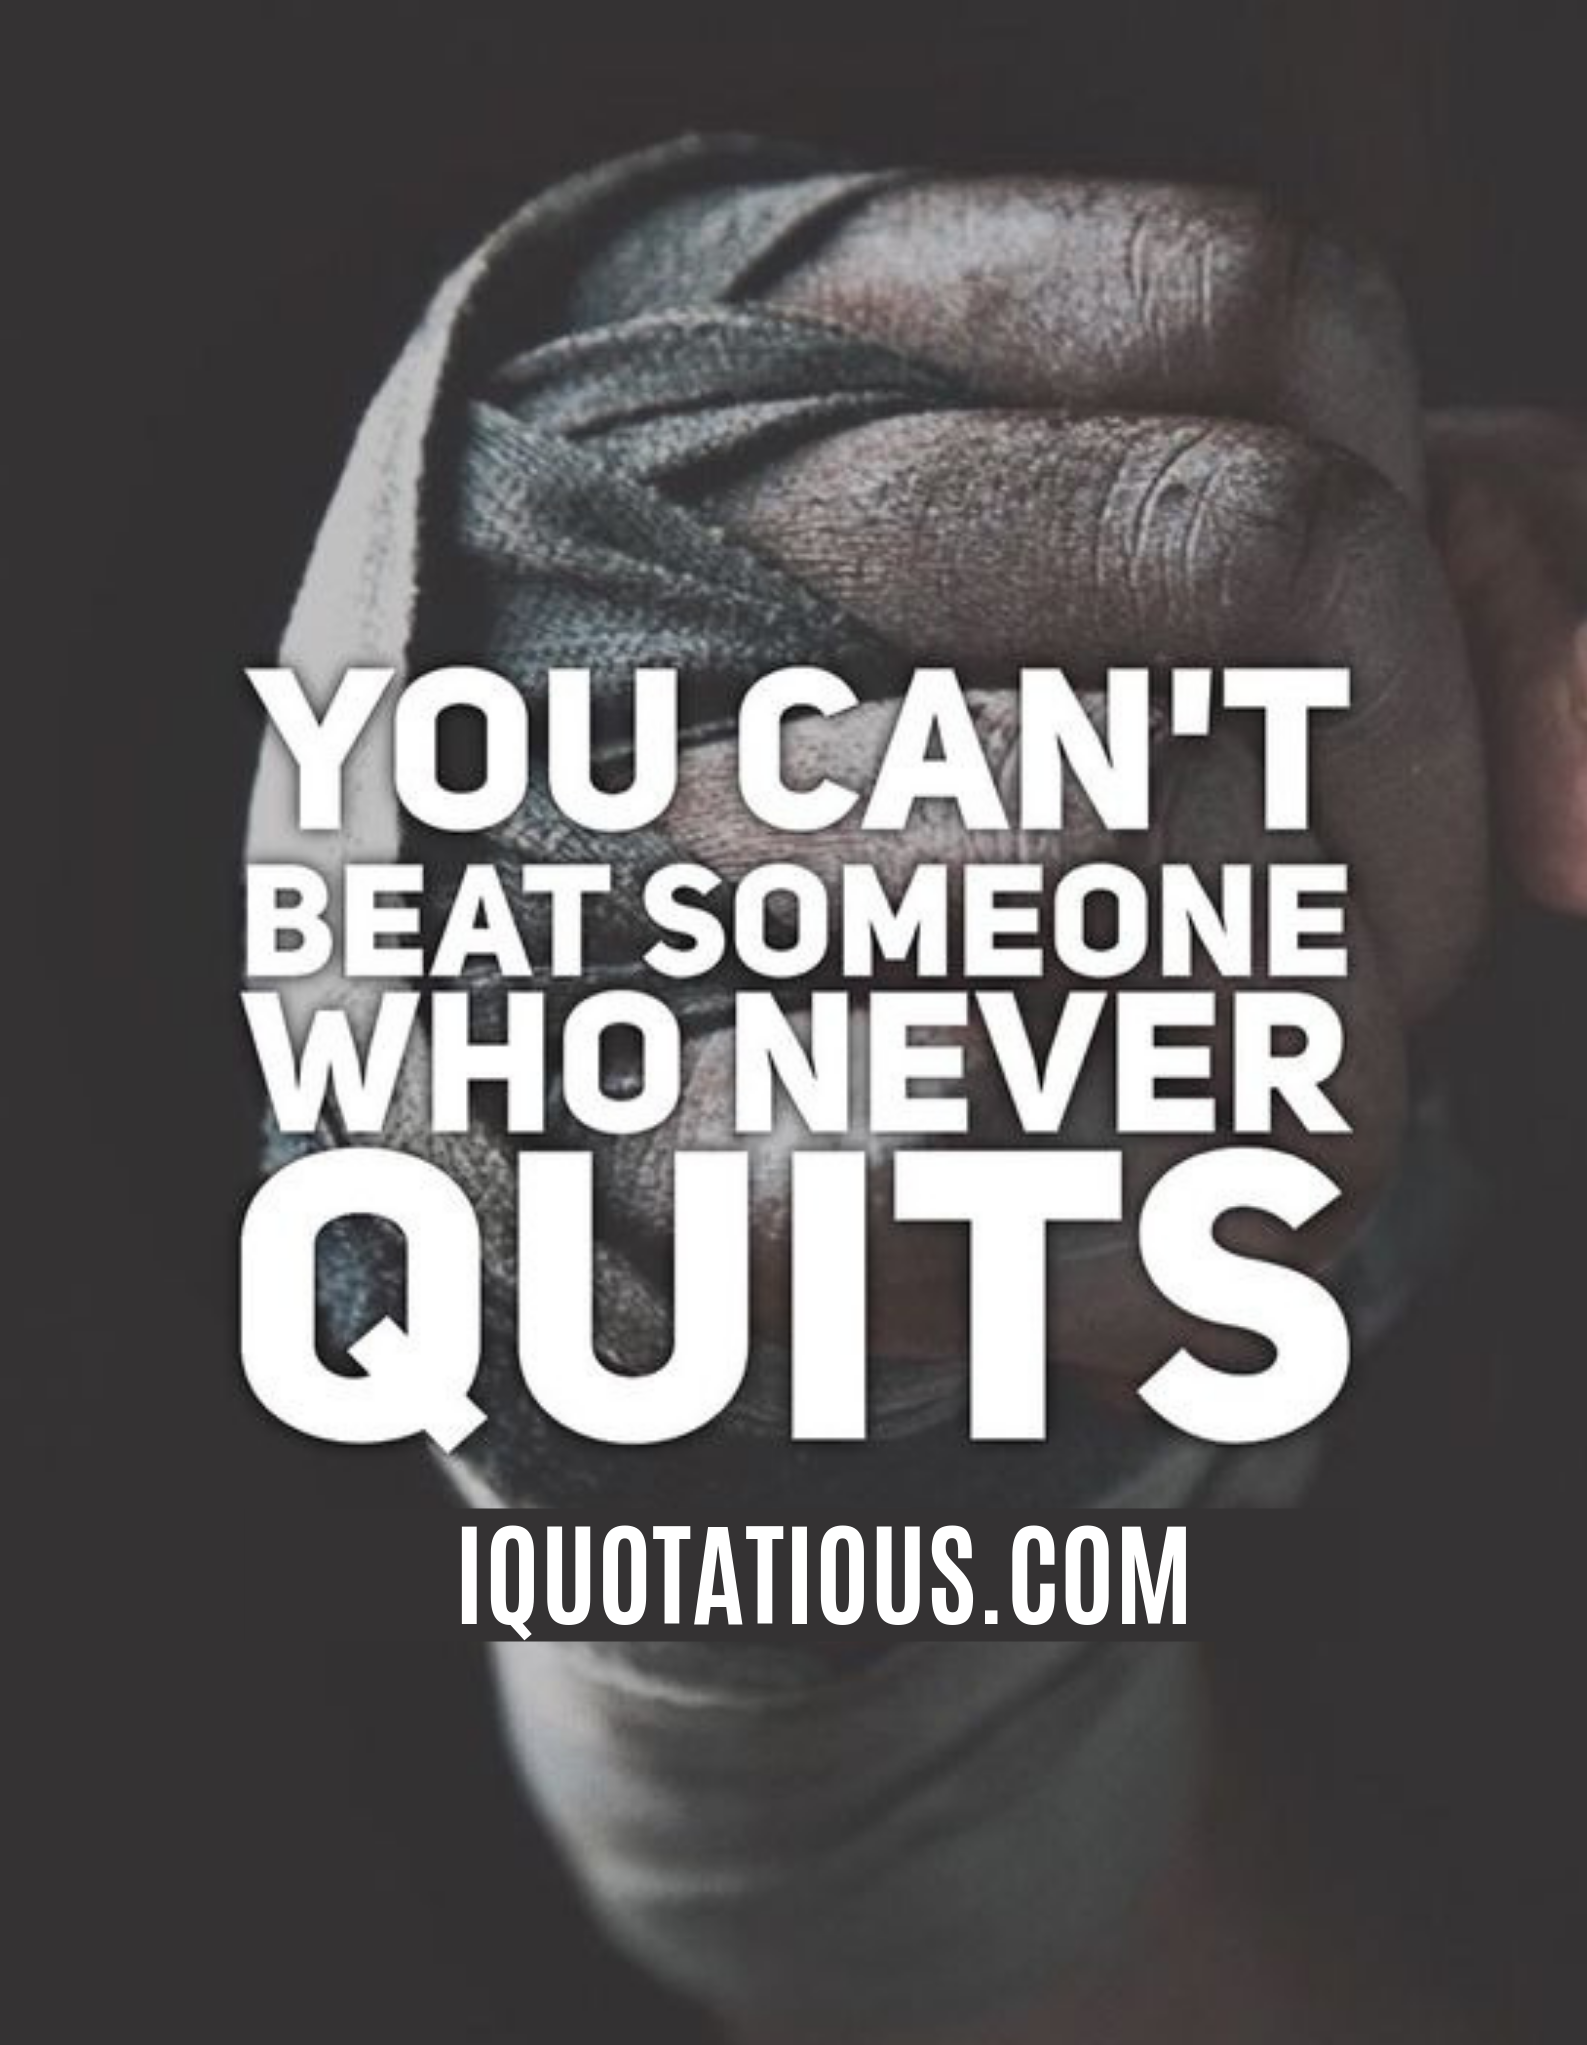 You can't beat someone who never quits.